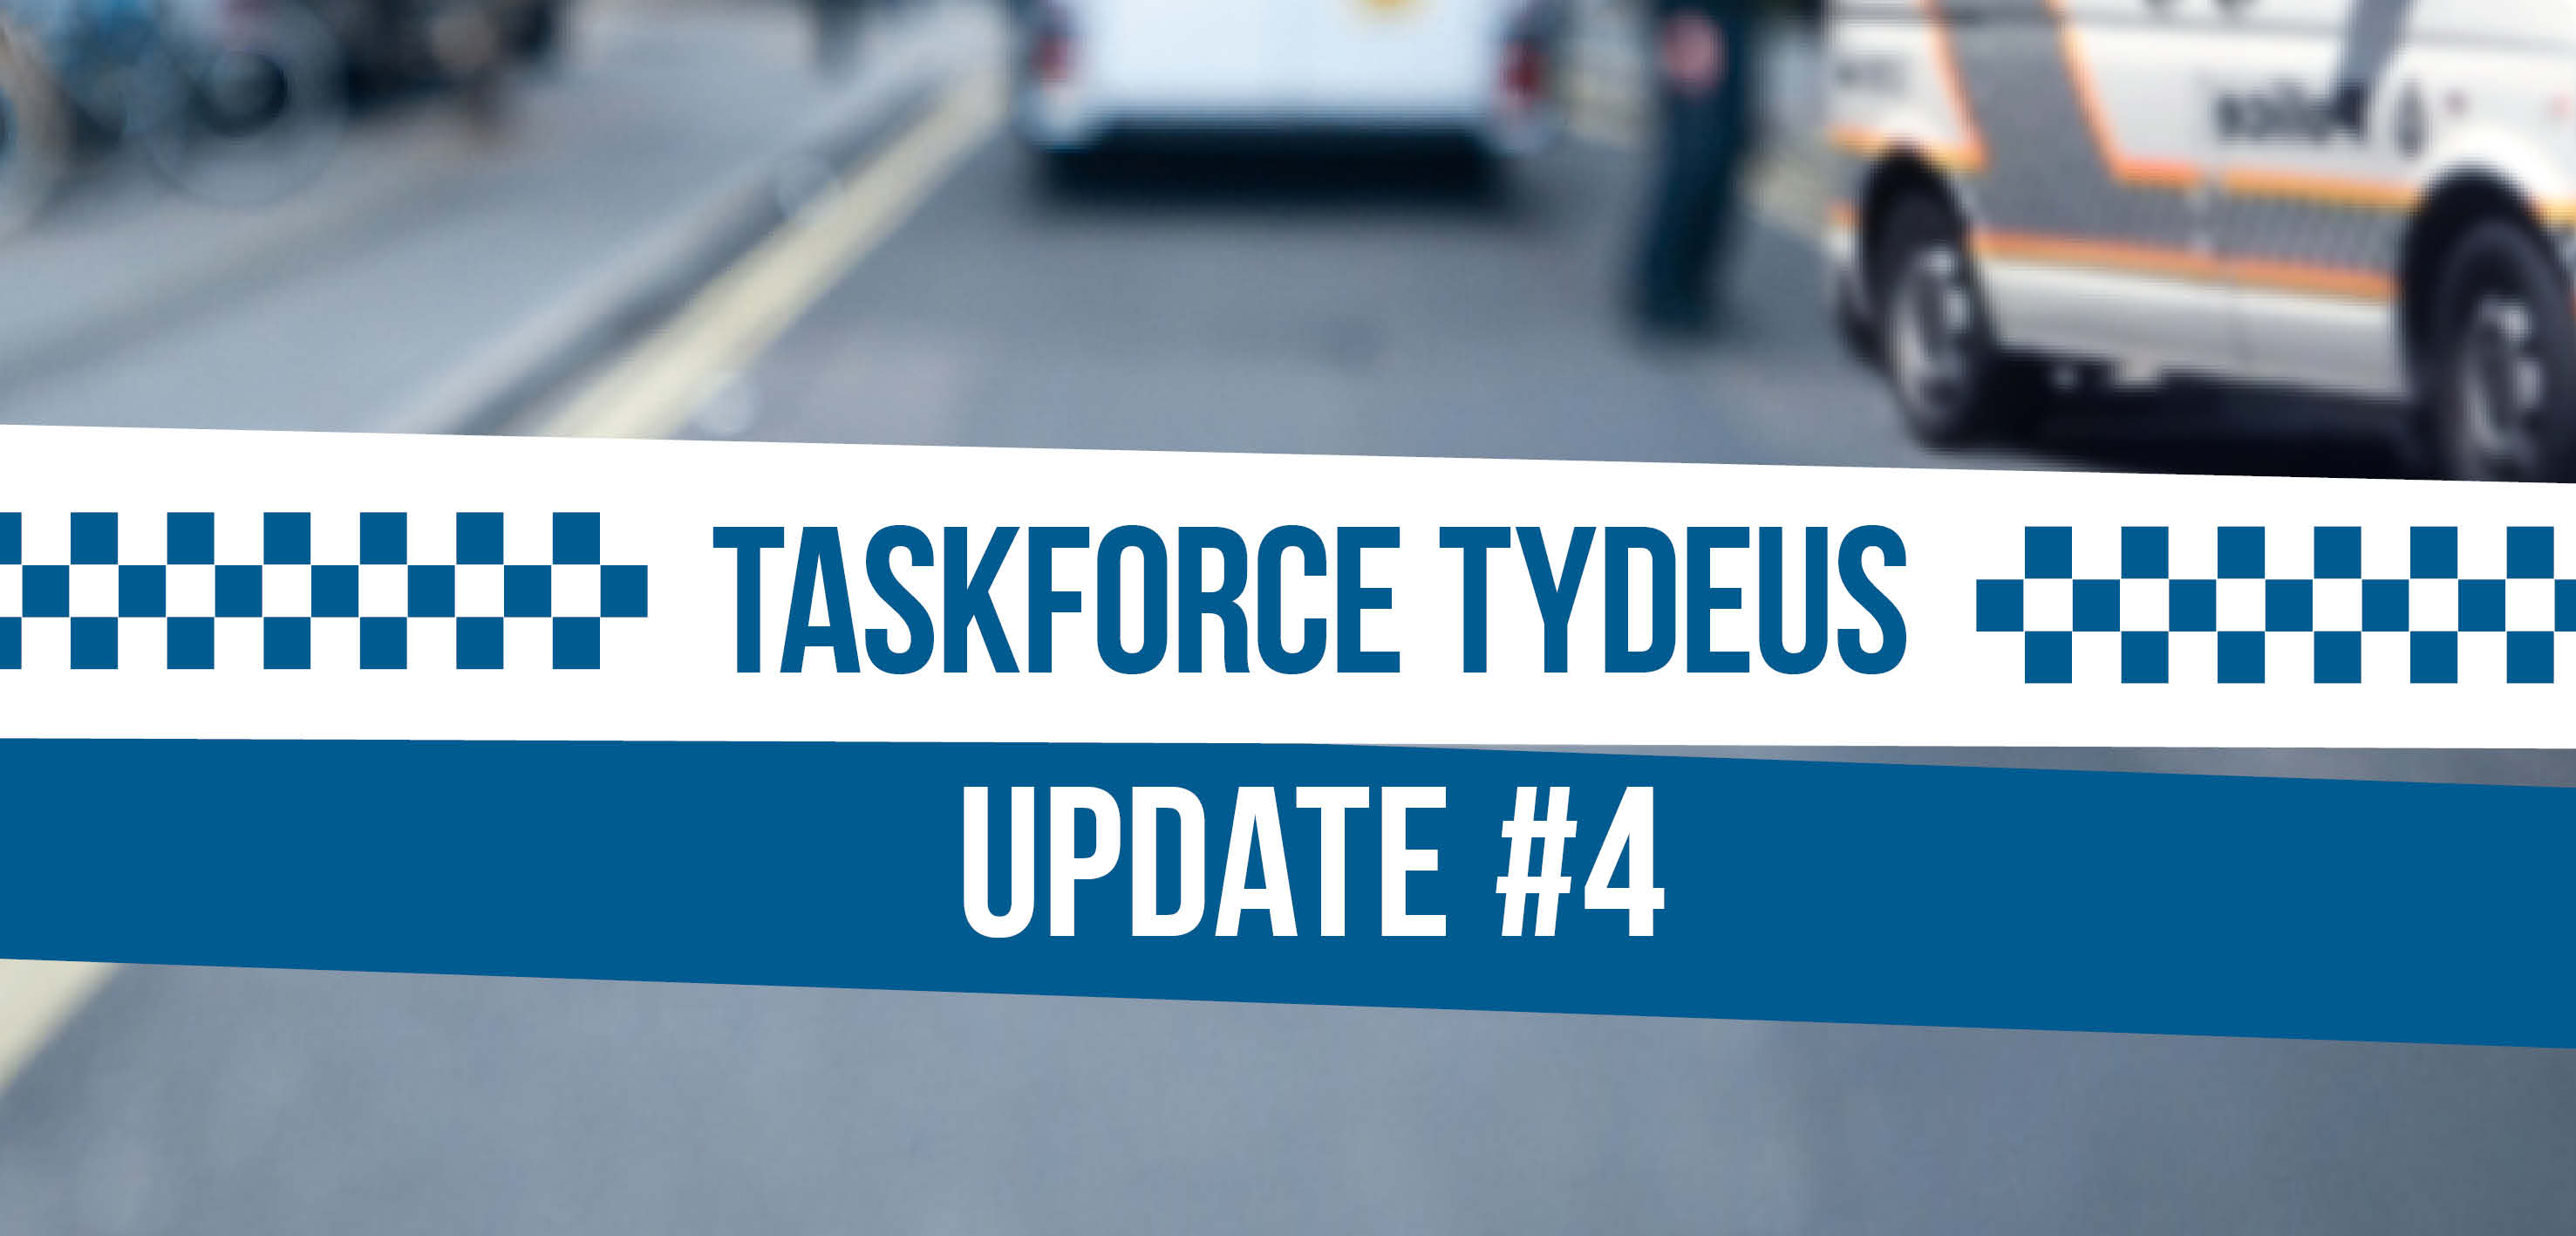 Second man to face court in relation to Taskforce Tydeus